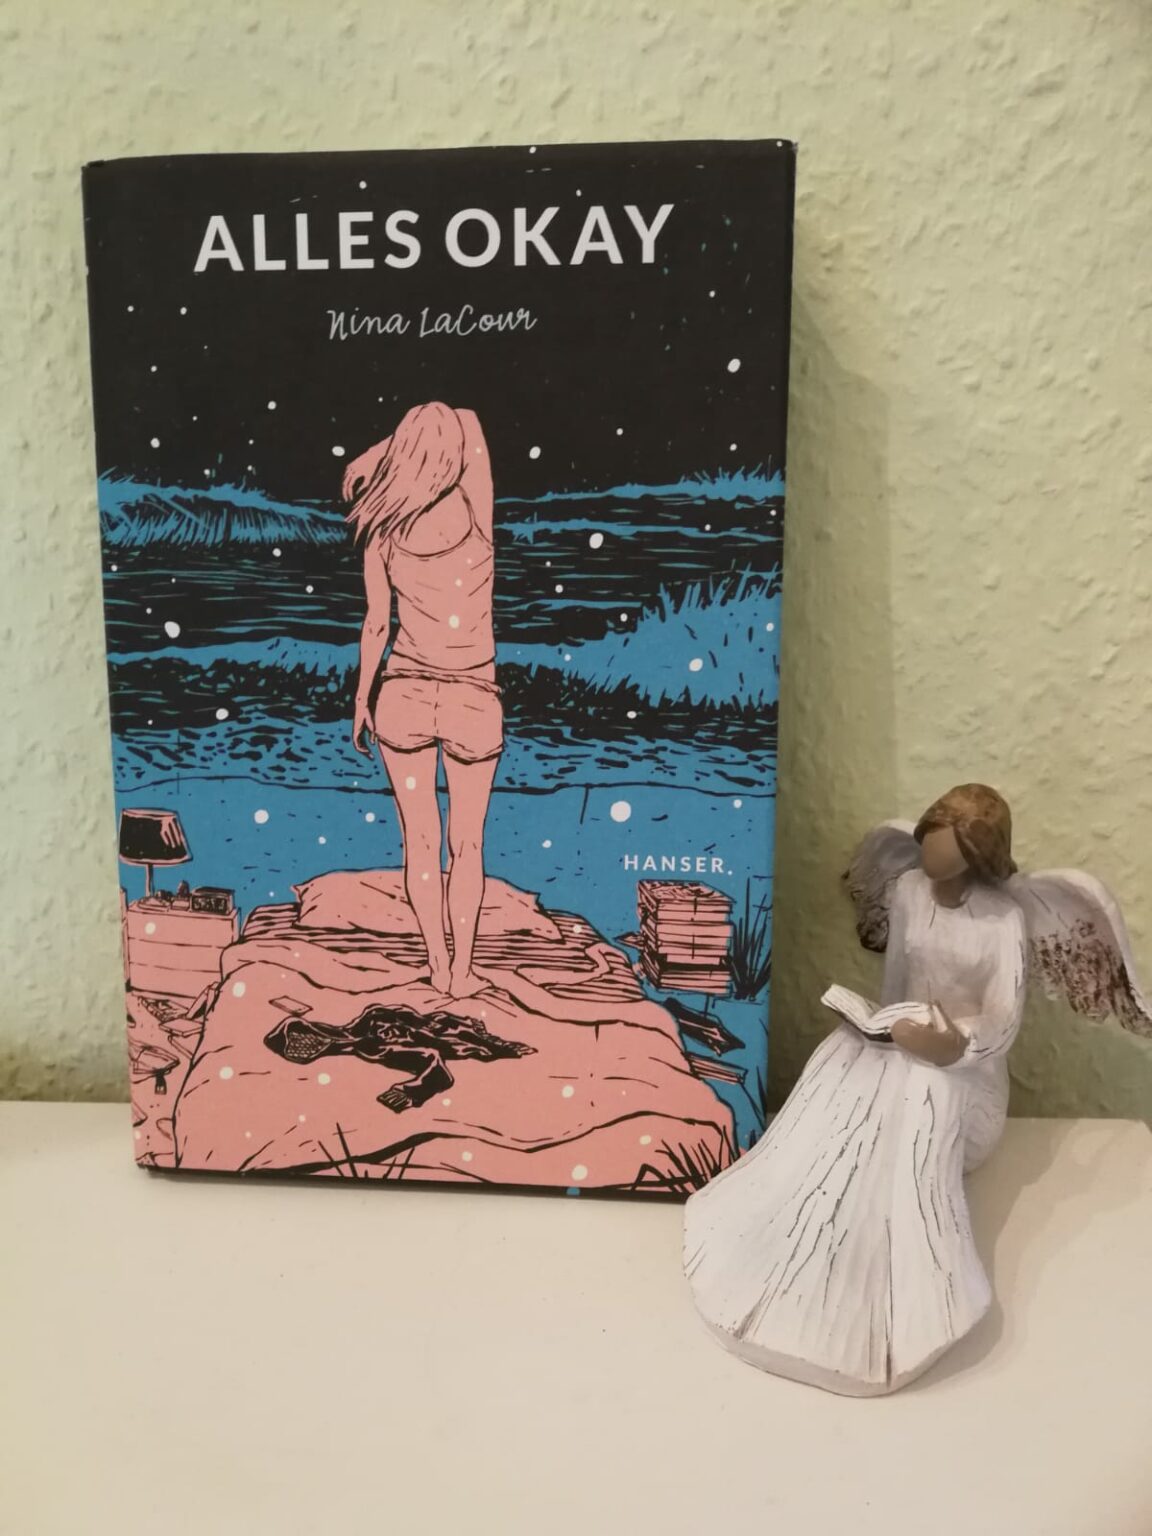 Alles okay by Nina LaCour